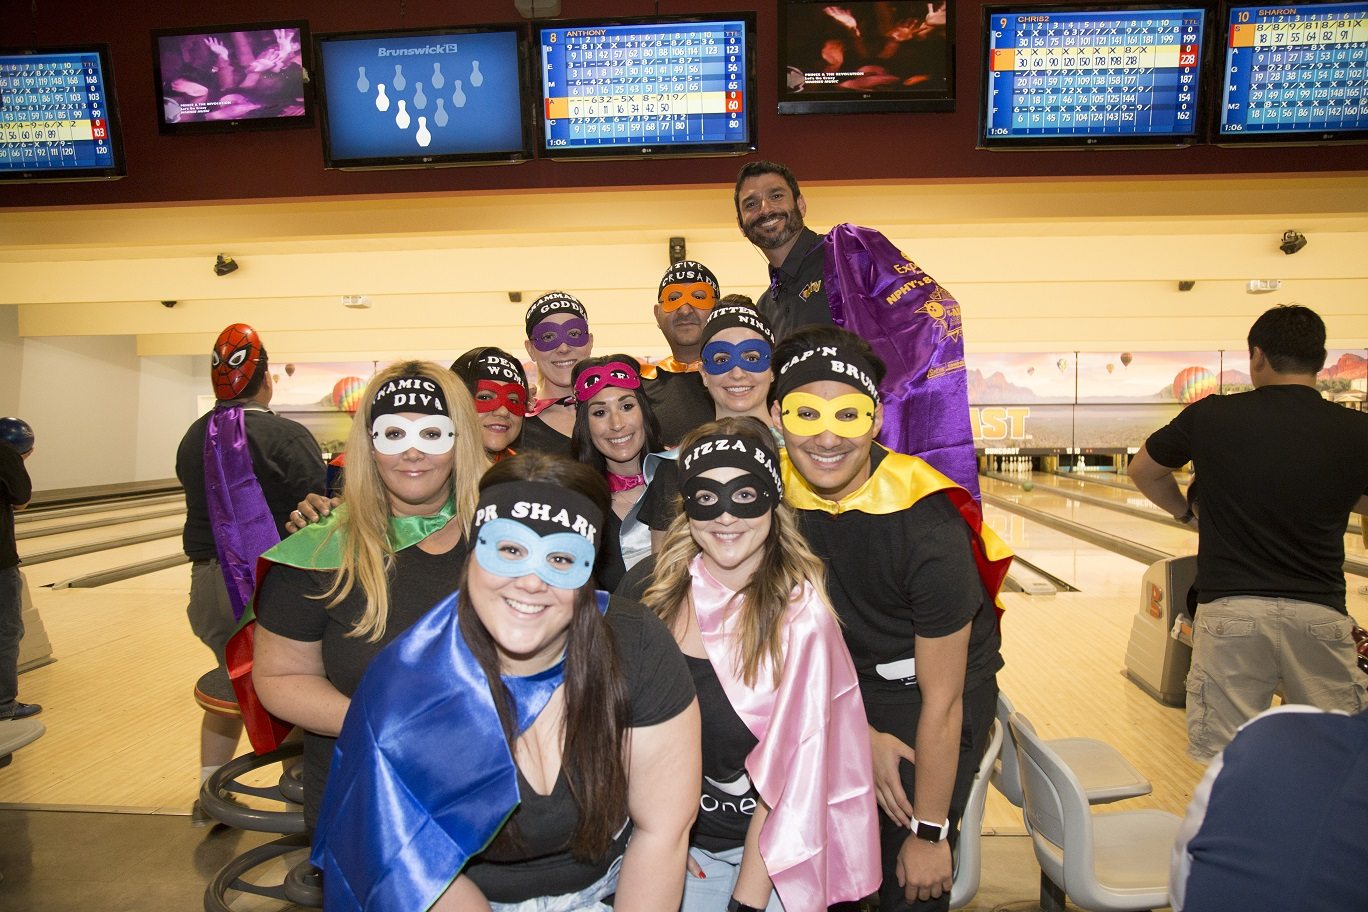 Community superheroes came together and raised more than $34,000 to help the nonprofit Nevada Partnership for Homeless Youth (NPHY)